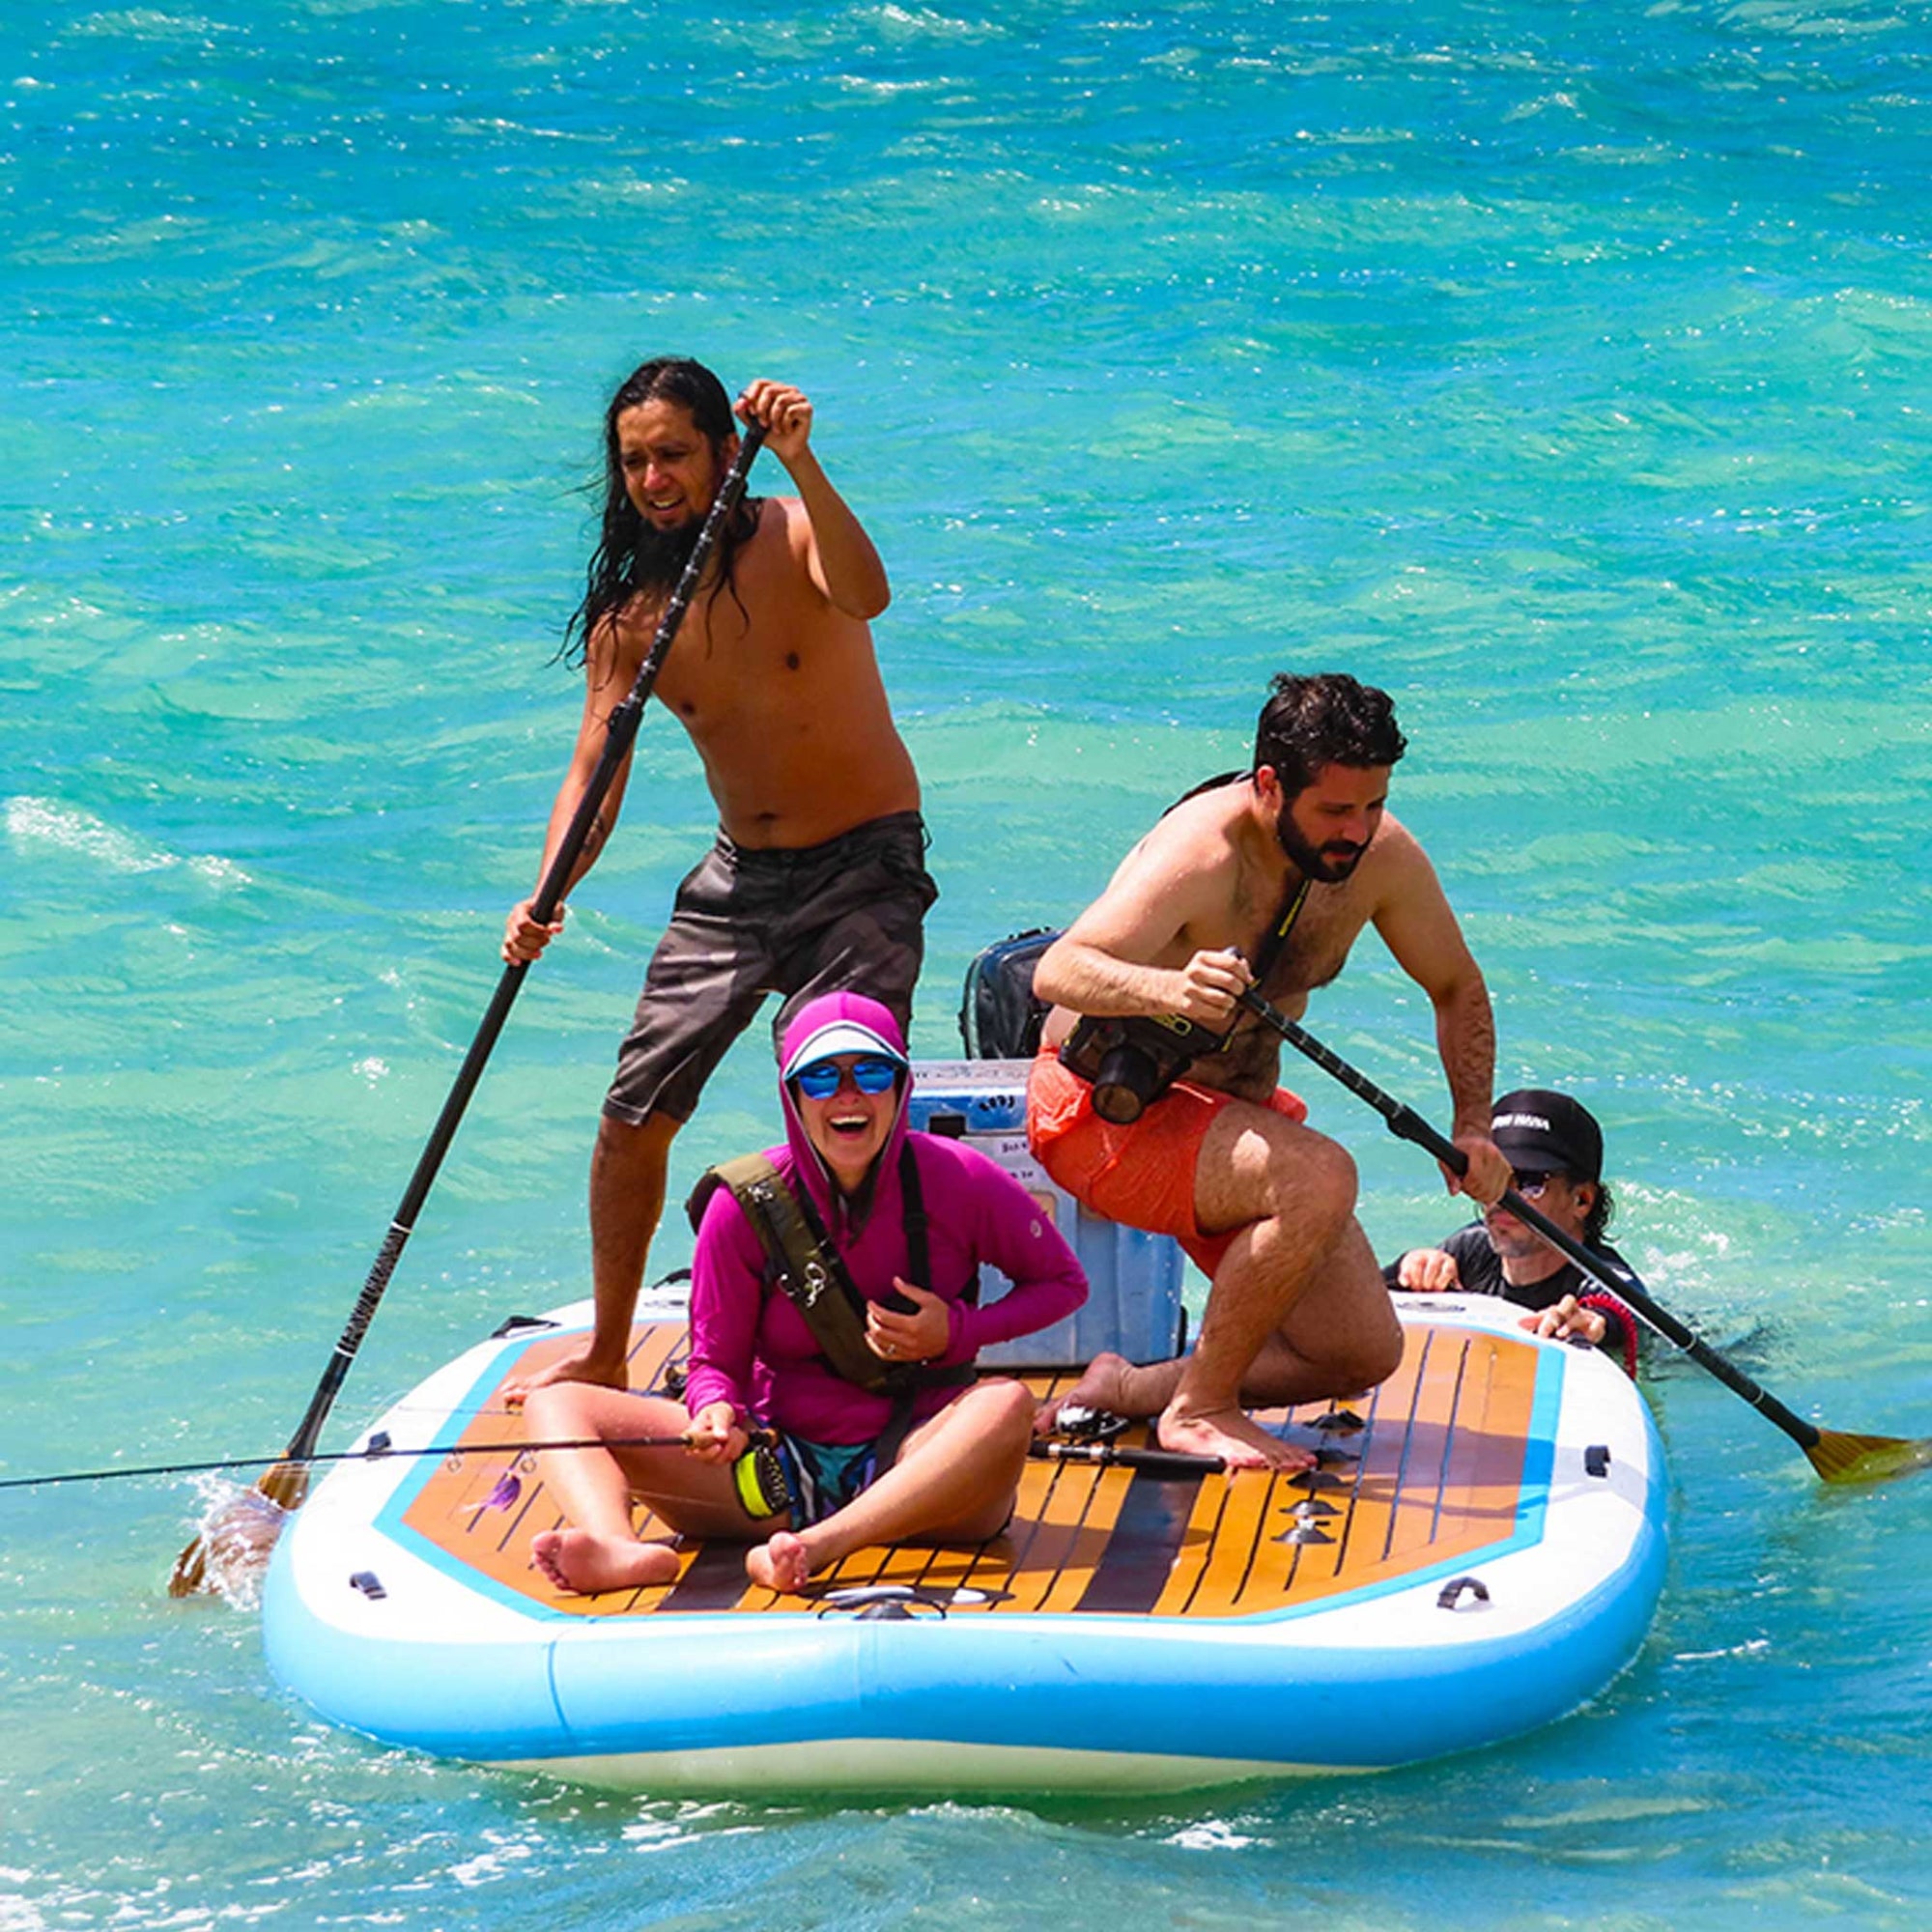 a group of people having fun on a giant inflatable paddleboard on the sea